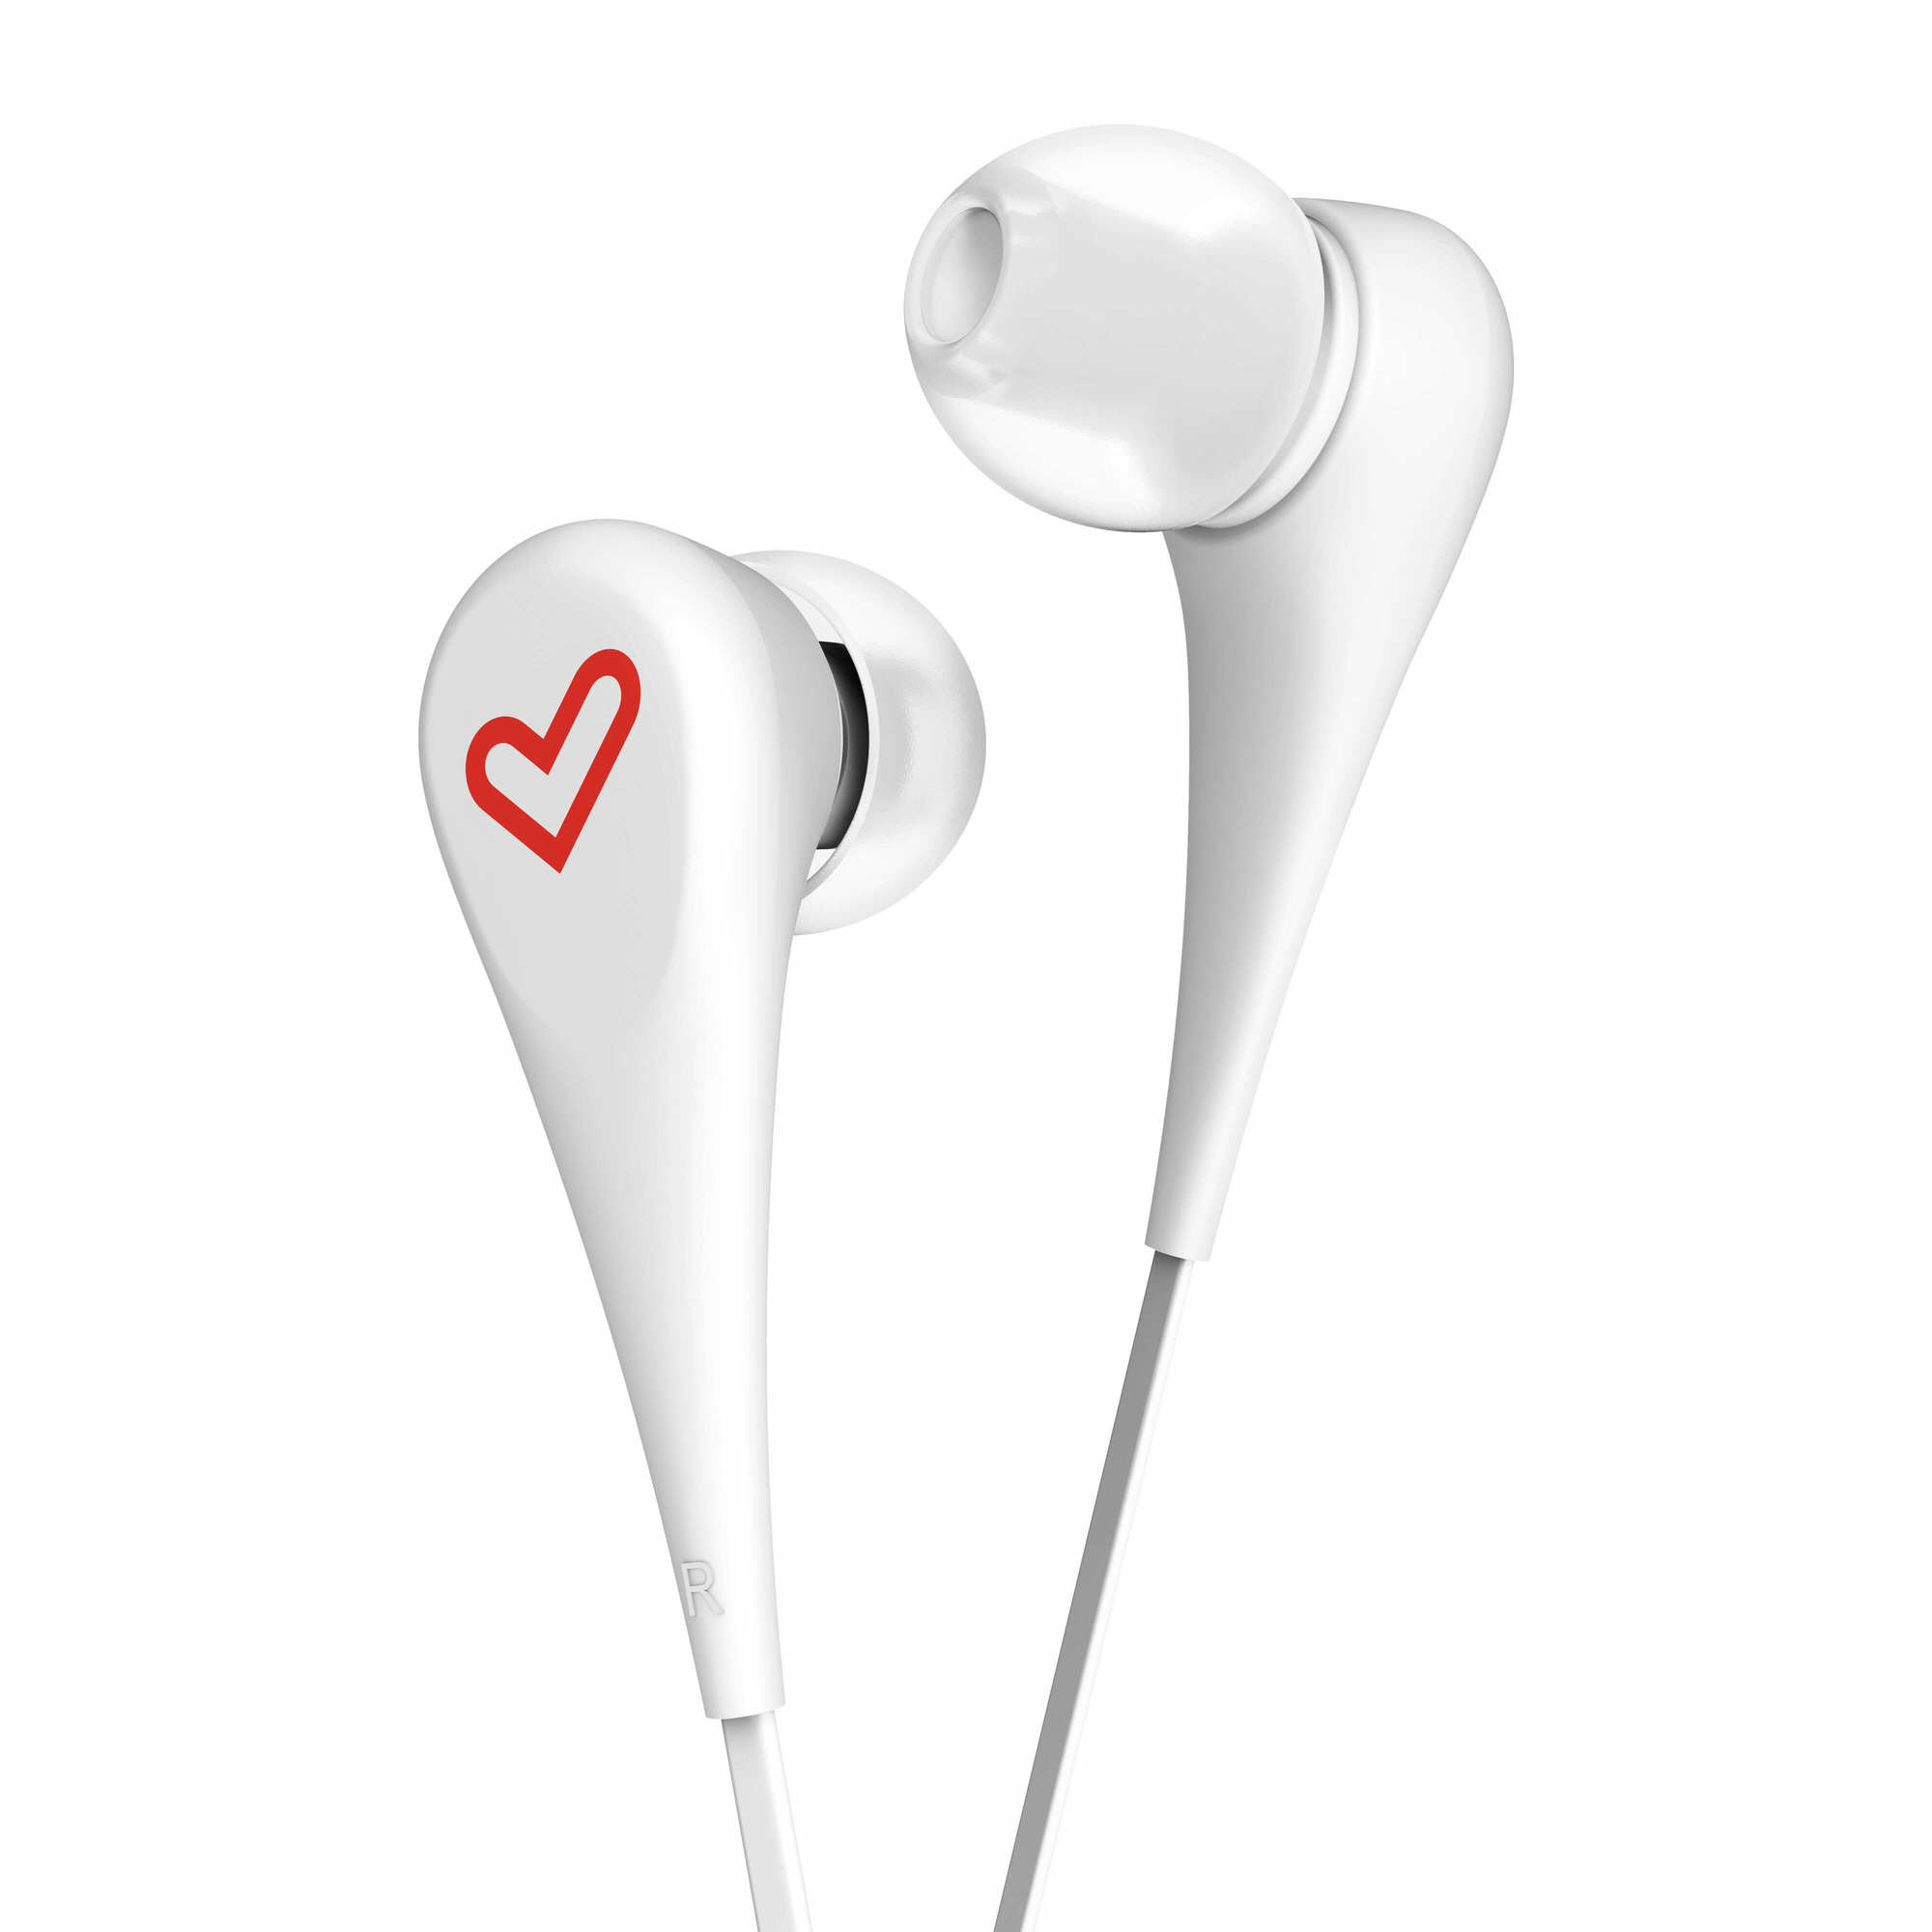 Includes a set of interchangeable earbuds in different sizes